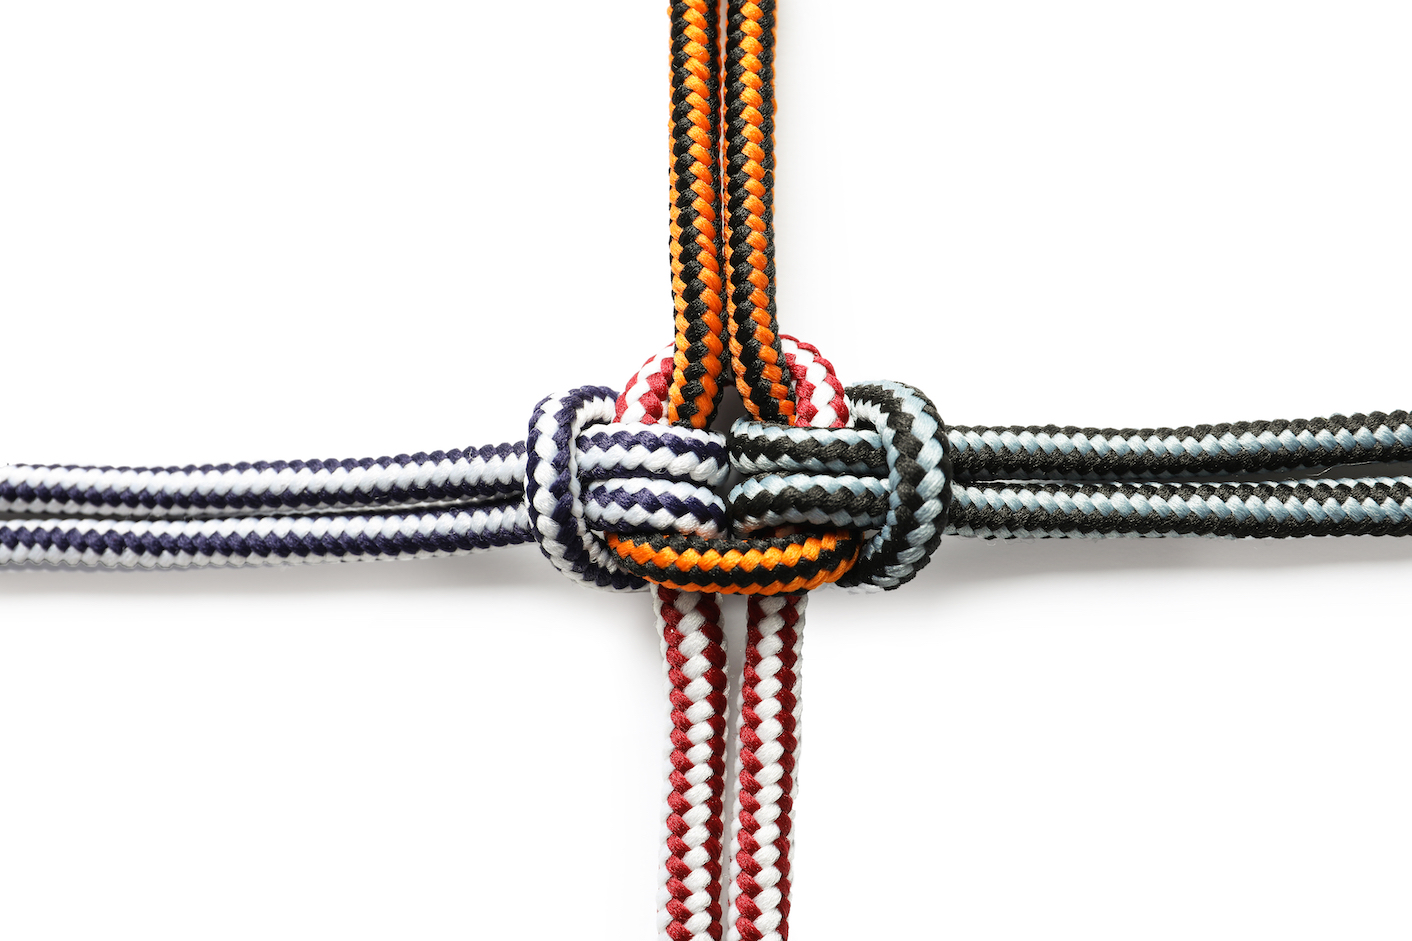 Colorful Ropes Tied Together On White Background. Unity Concept